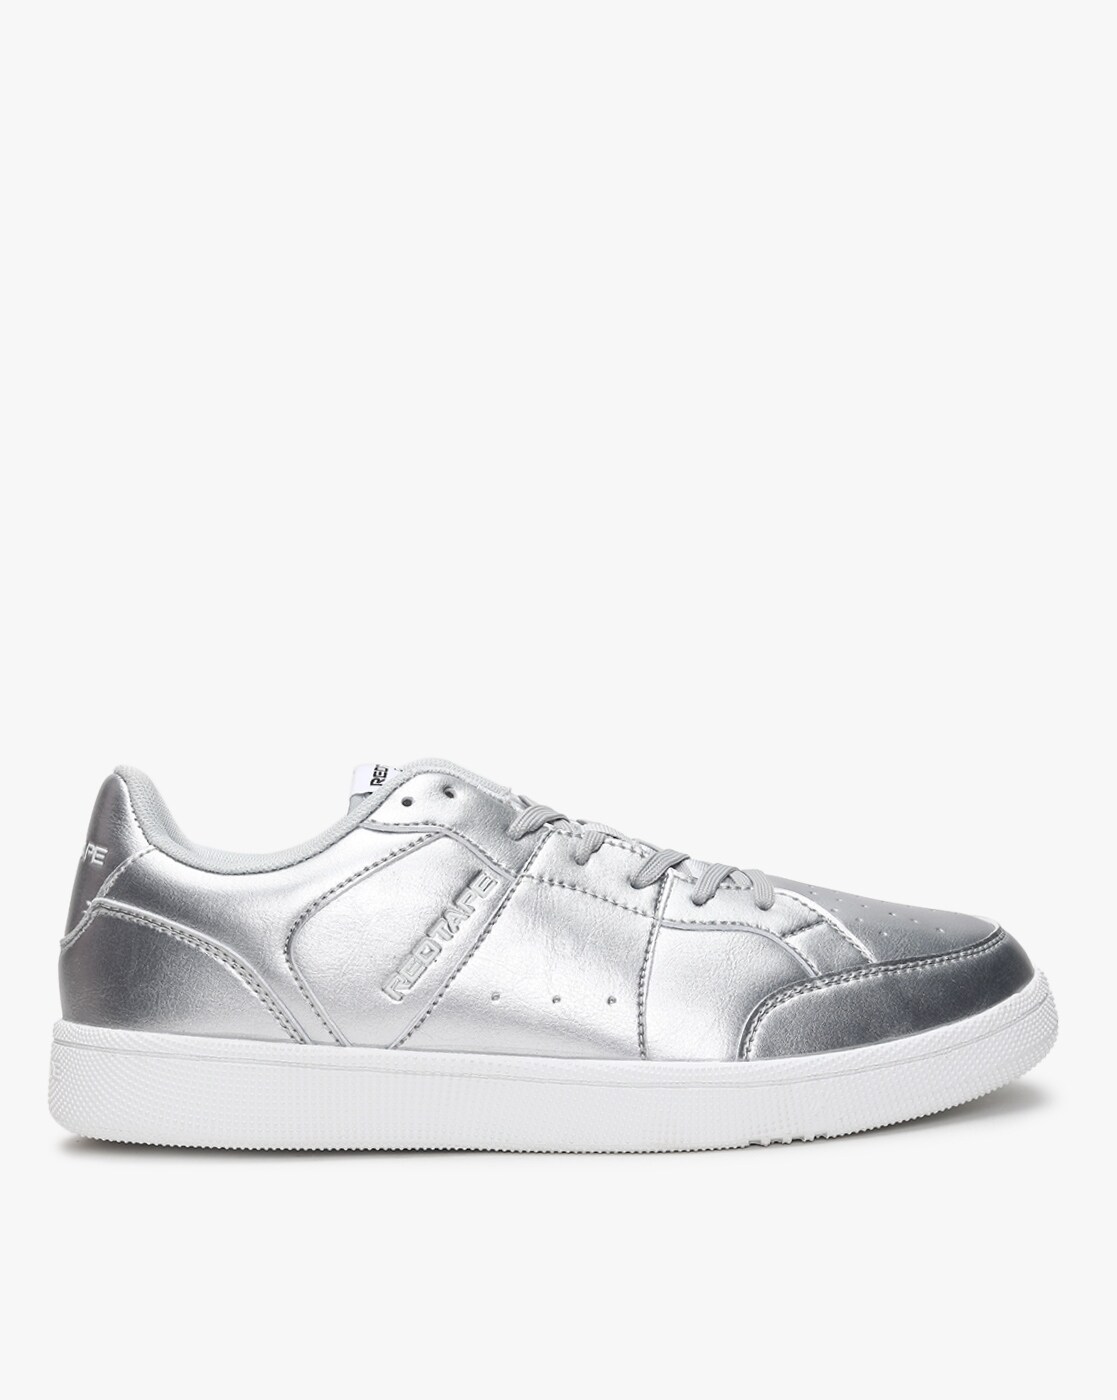 Cynthia Richard Fearless Silver Wedge Sneaker – Move Athleisure